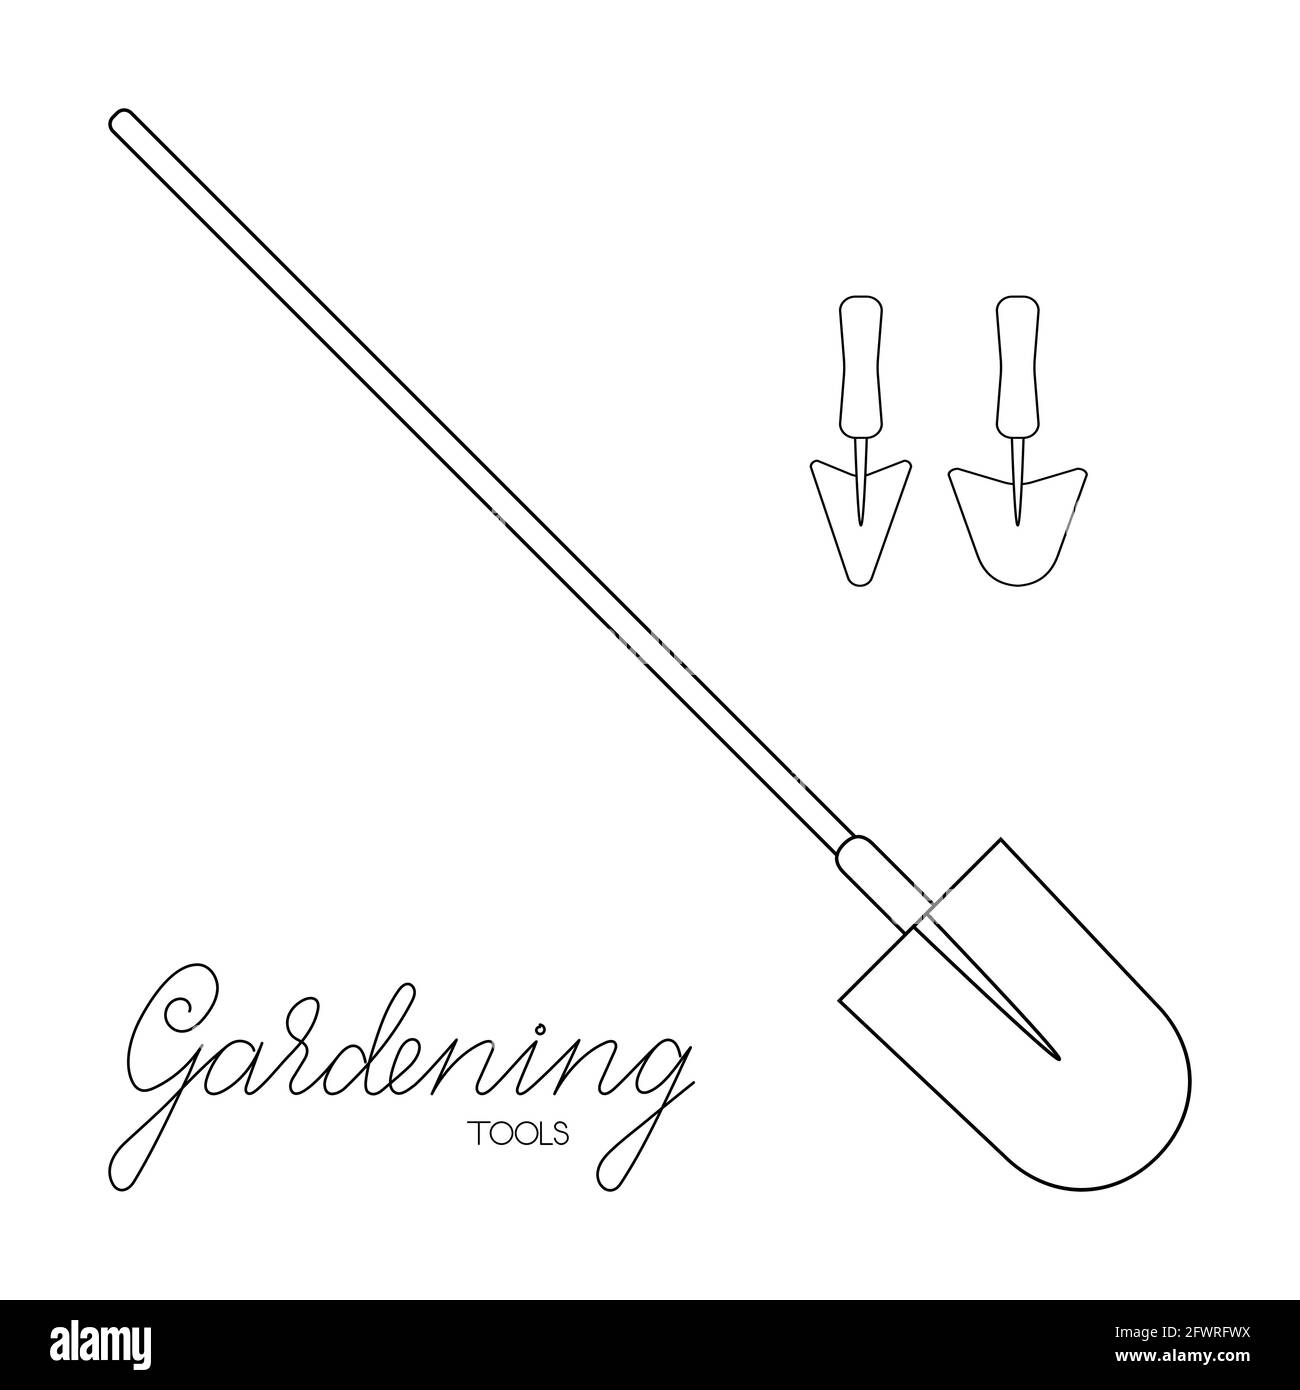 Gardening tools set of spade and trowels with lettering outline simple minimalistic flat design vector illustration isolated on white background Stock Vector